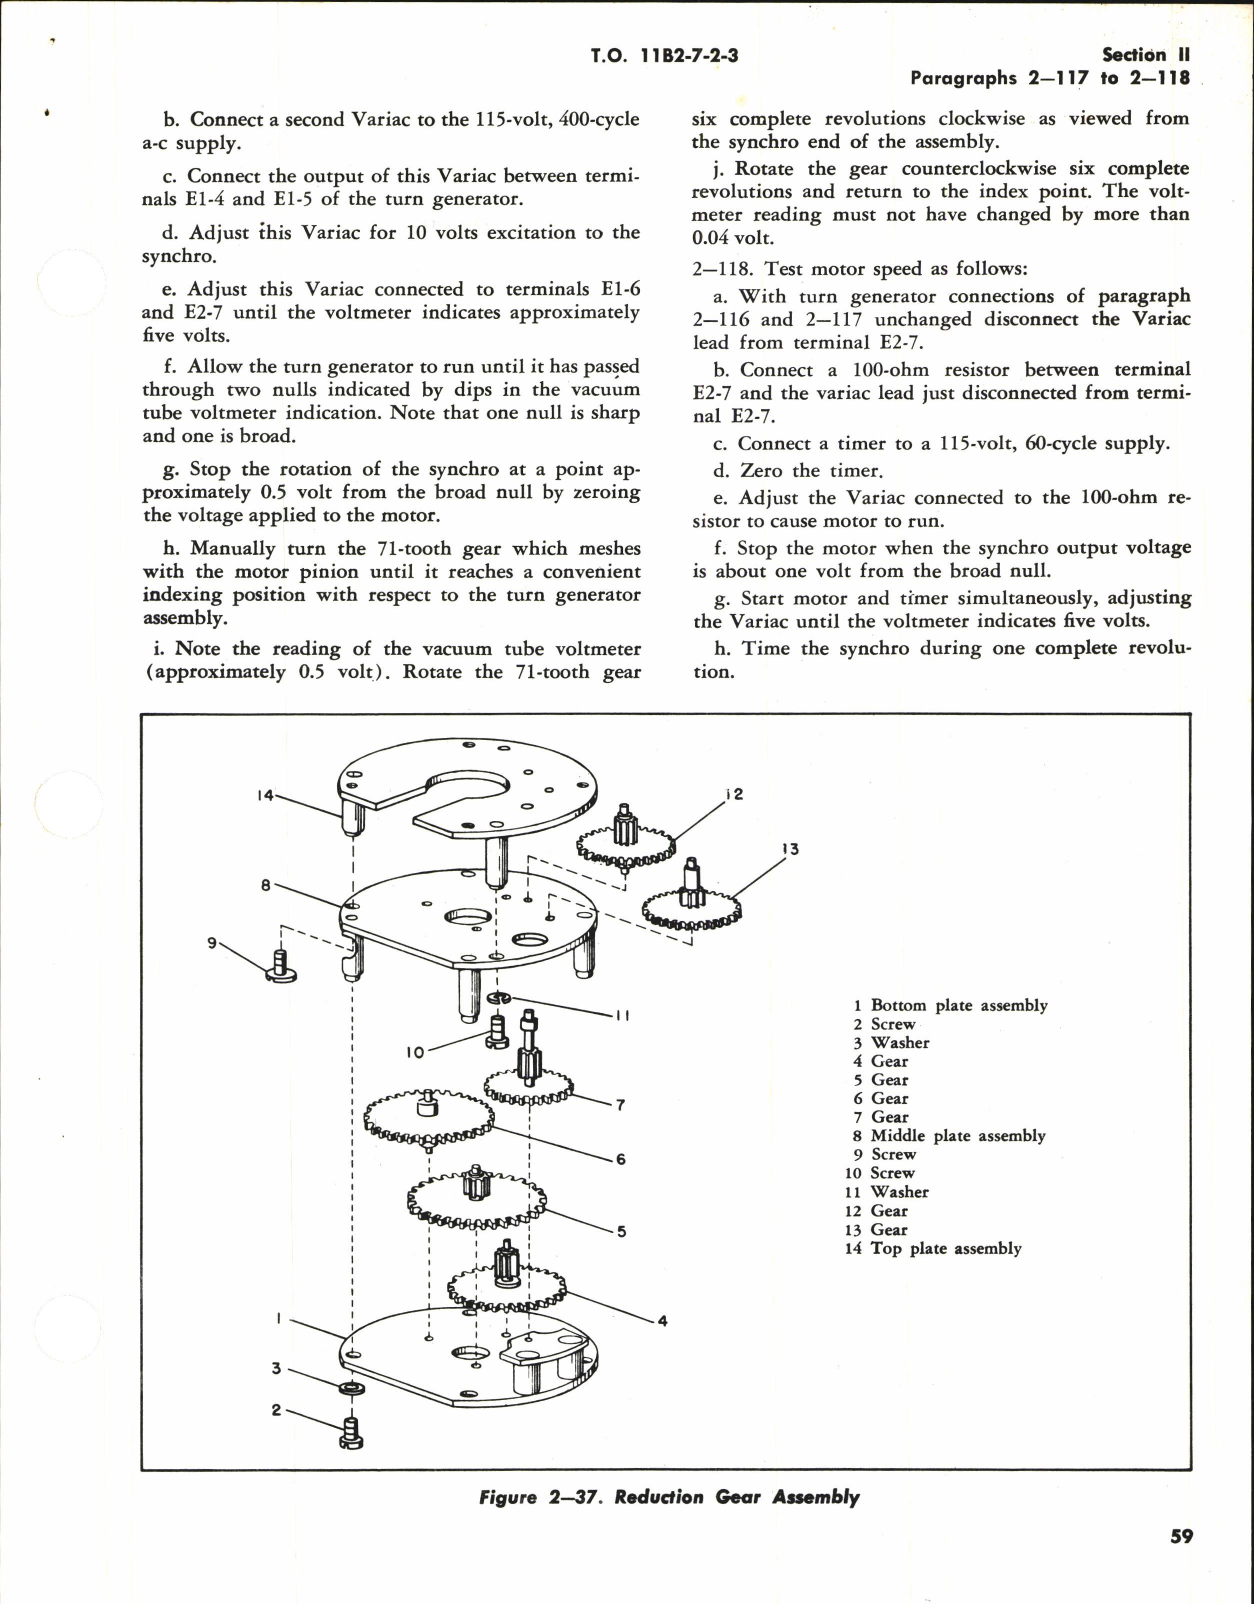 Sample page 7 from AirCorps Library document: Overhaul Instructions for Stabilization Amplifier Type B-1 and Electronic Control Stabilization Amplifier Type MD-2